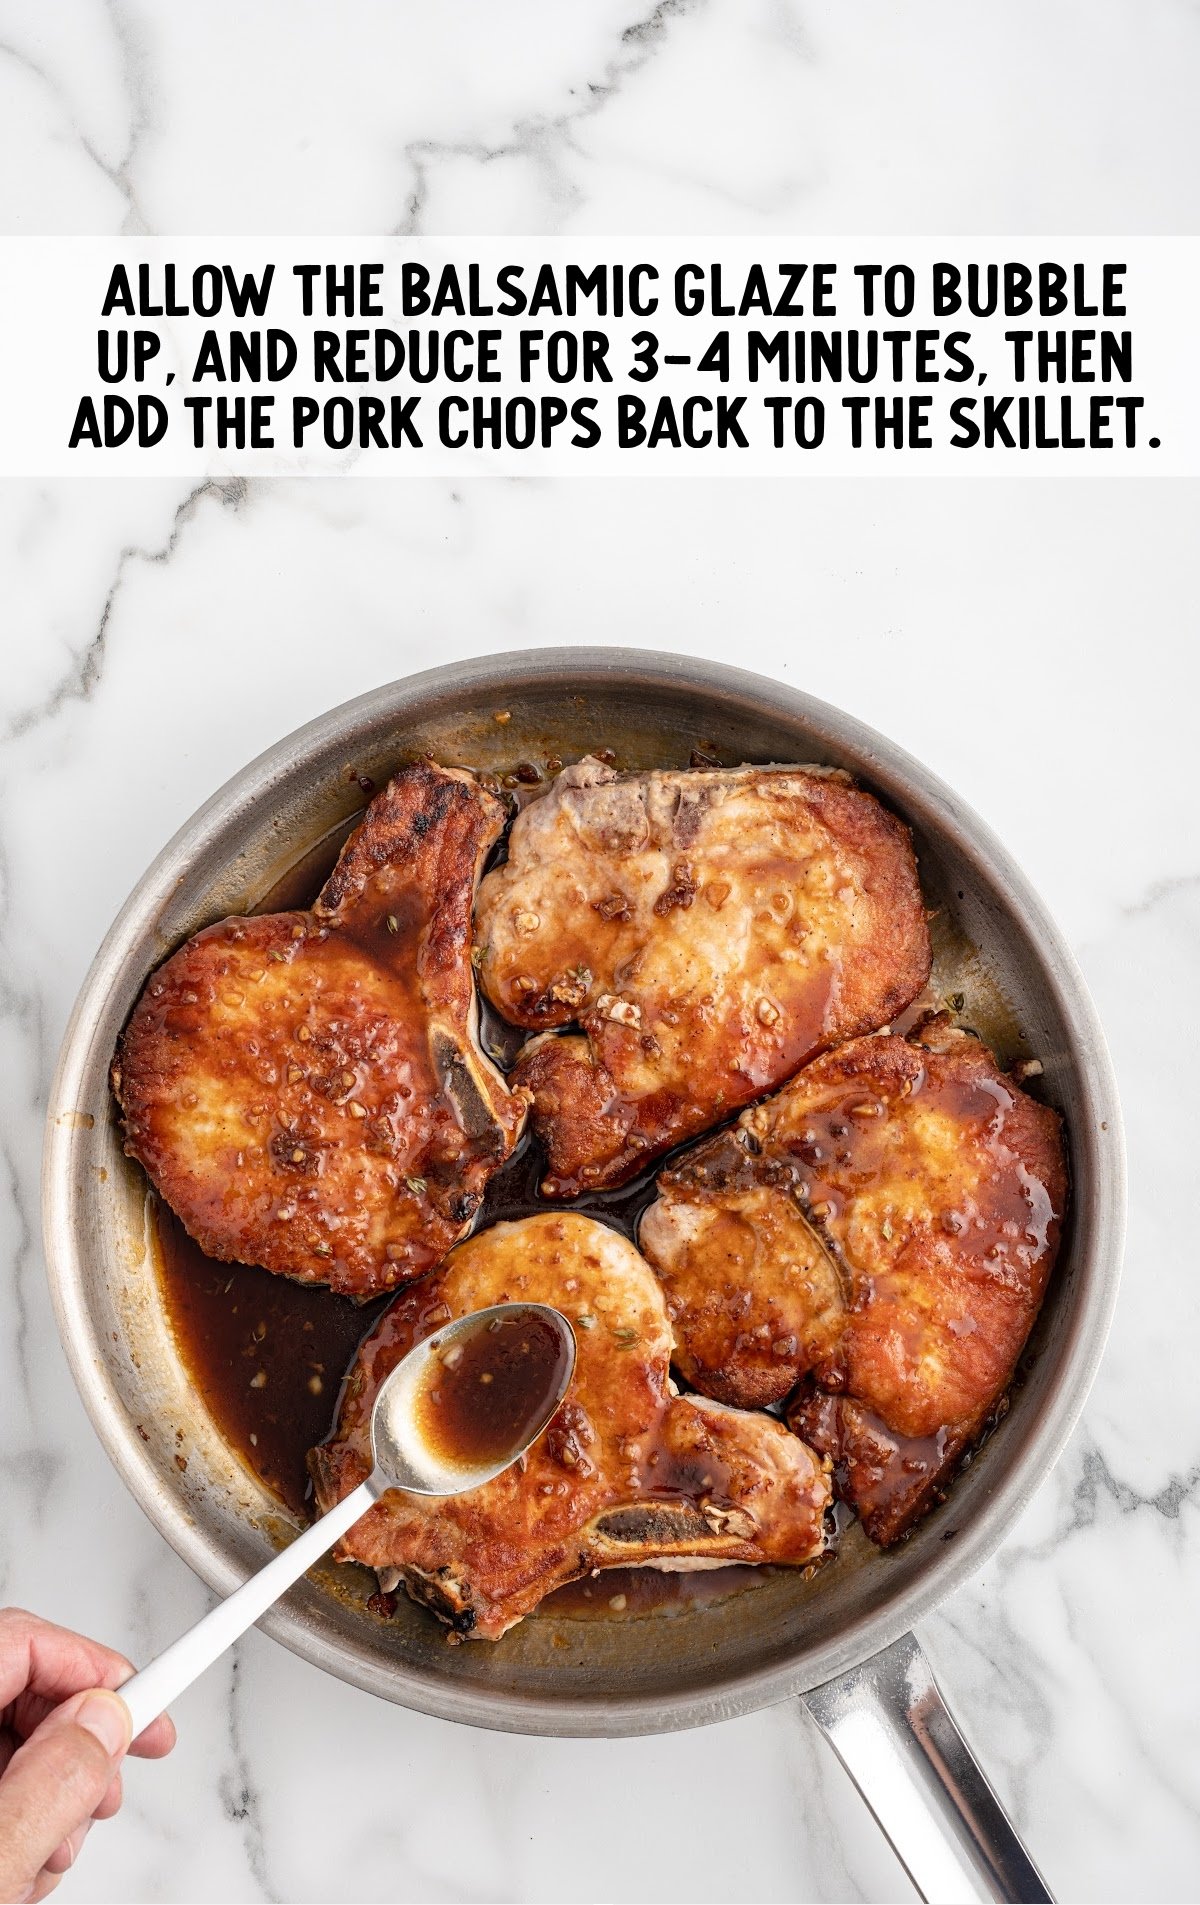 reduce glaze in a skillet and spoon onto pork chops